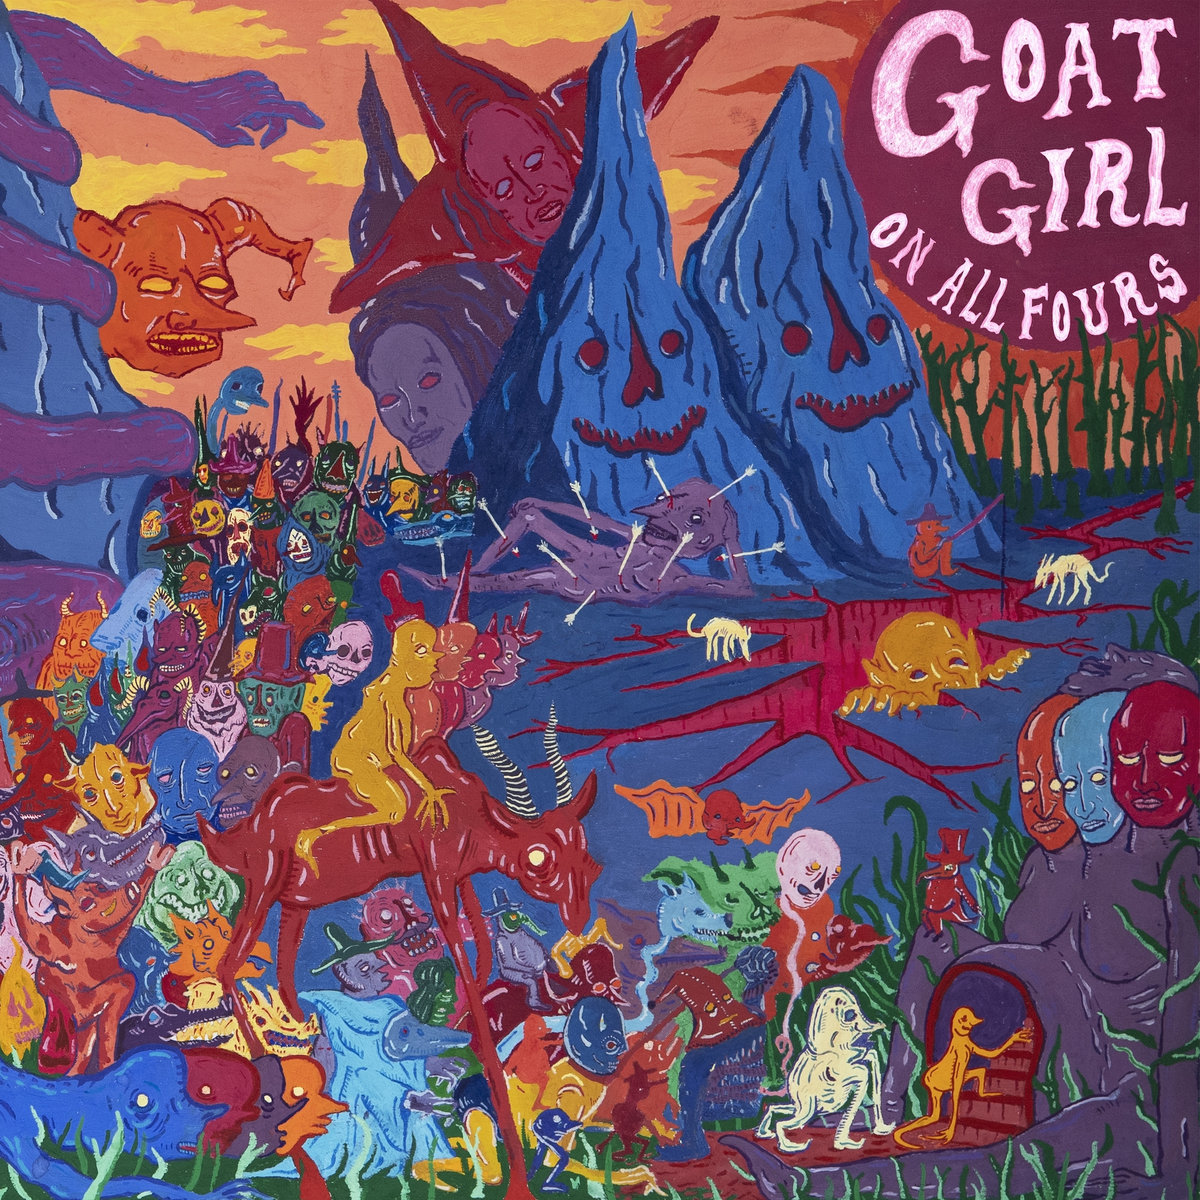 Goat Girl | On All Fours | Rough Trade Records